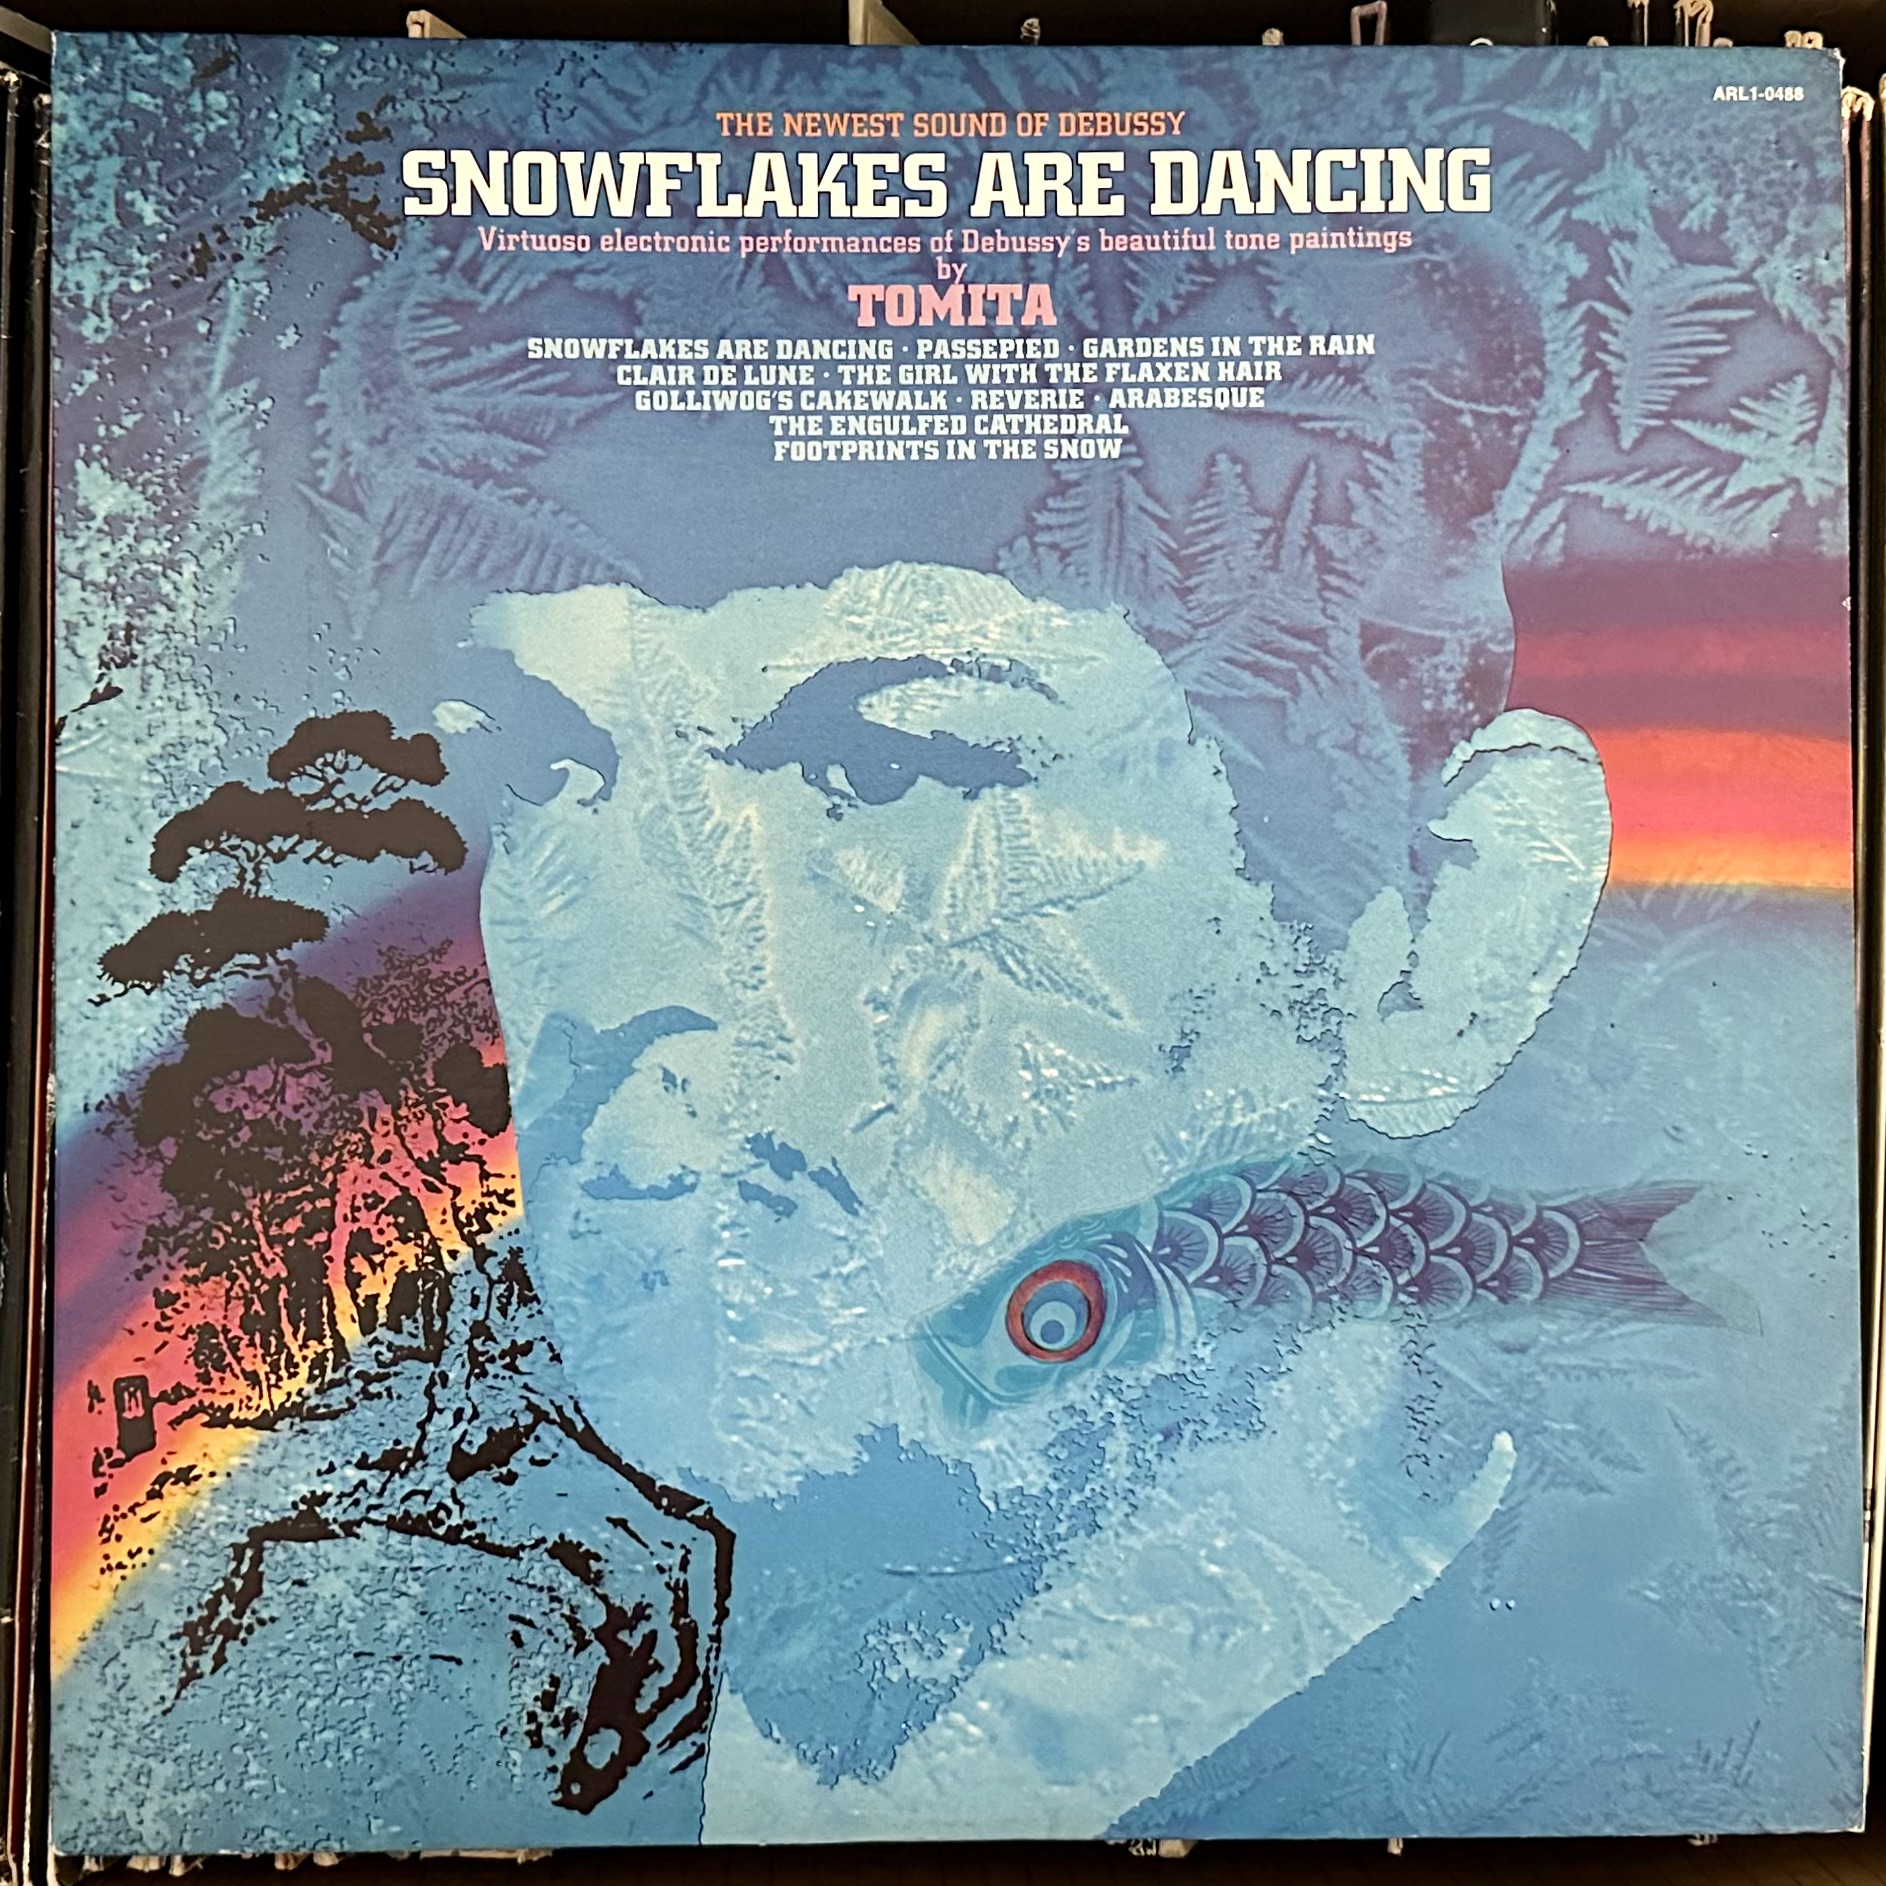 Snowflakes Are Dancing by Tomita